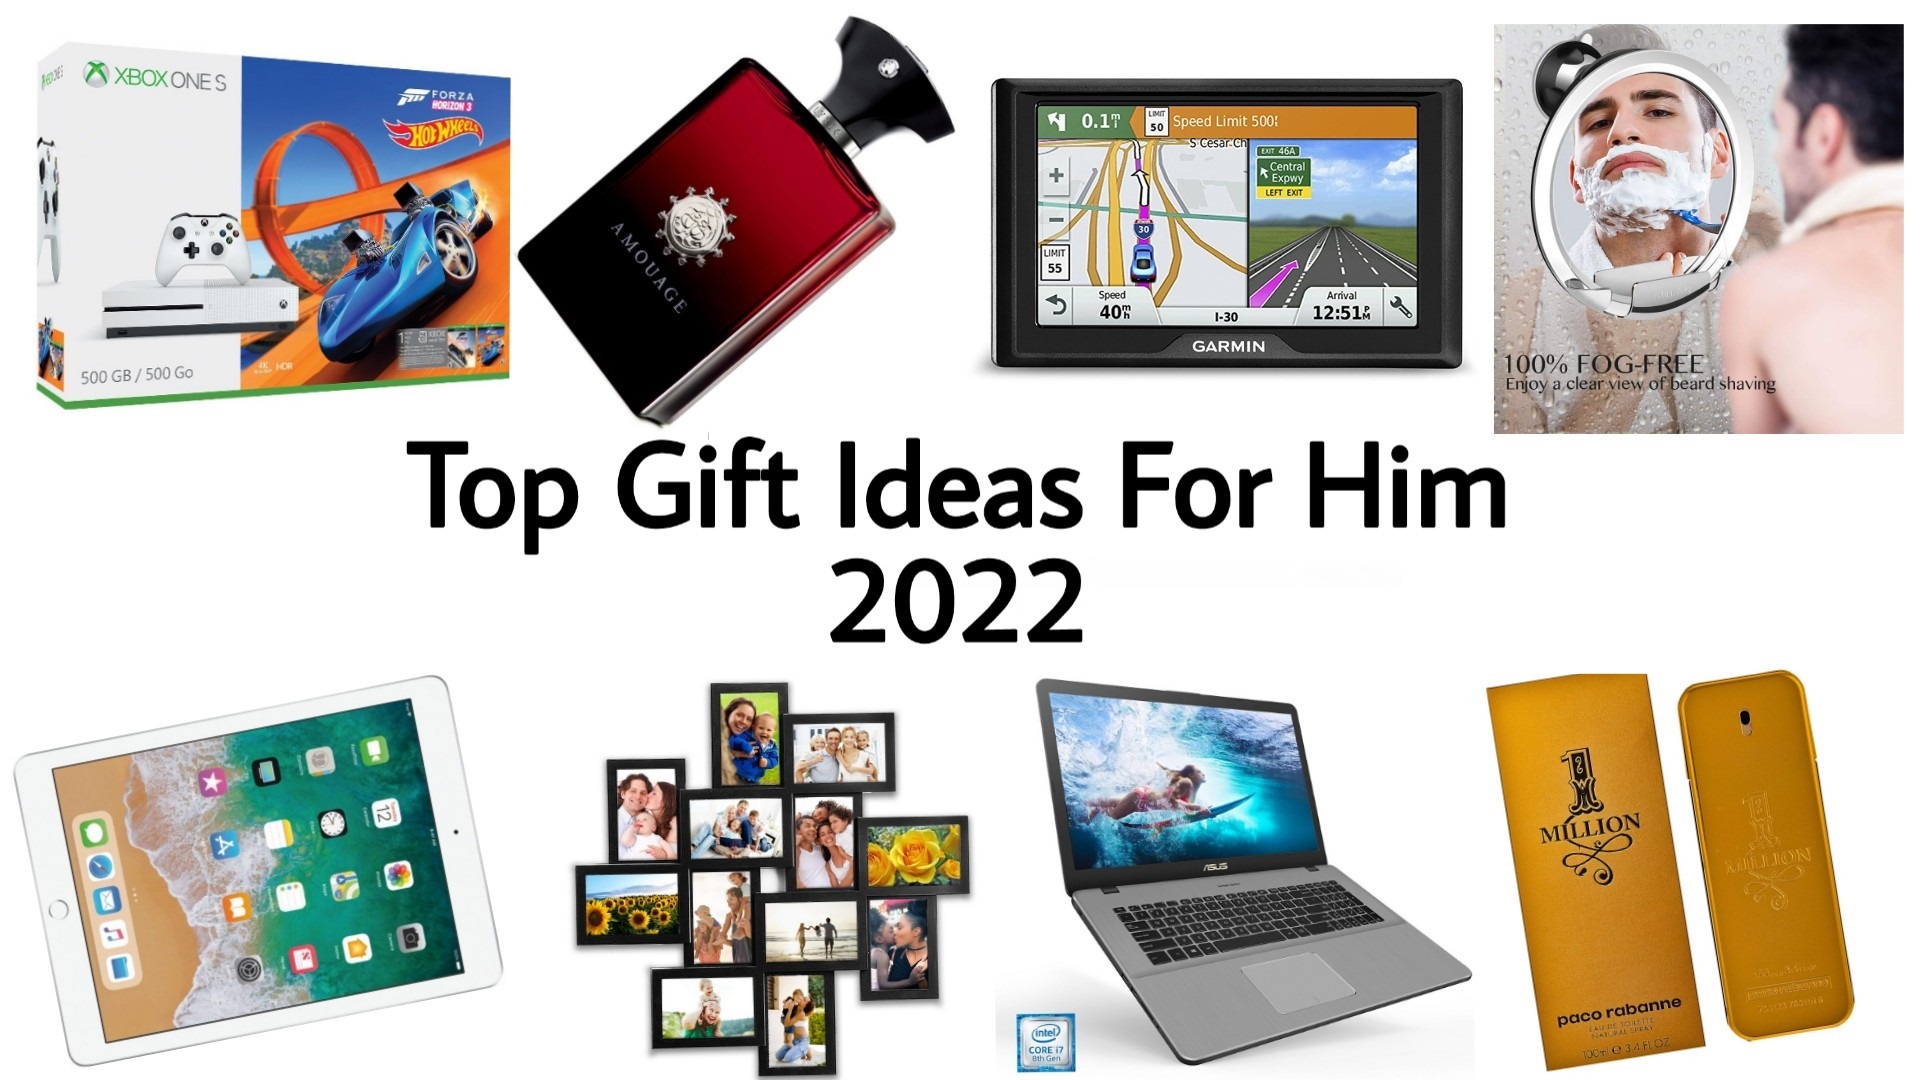 2022 Top Birthday Gift ideas for him - Top 10 Christmas Gifts for Boyfriend 2022